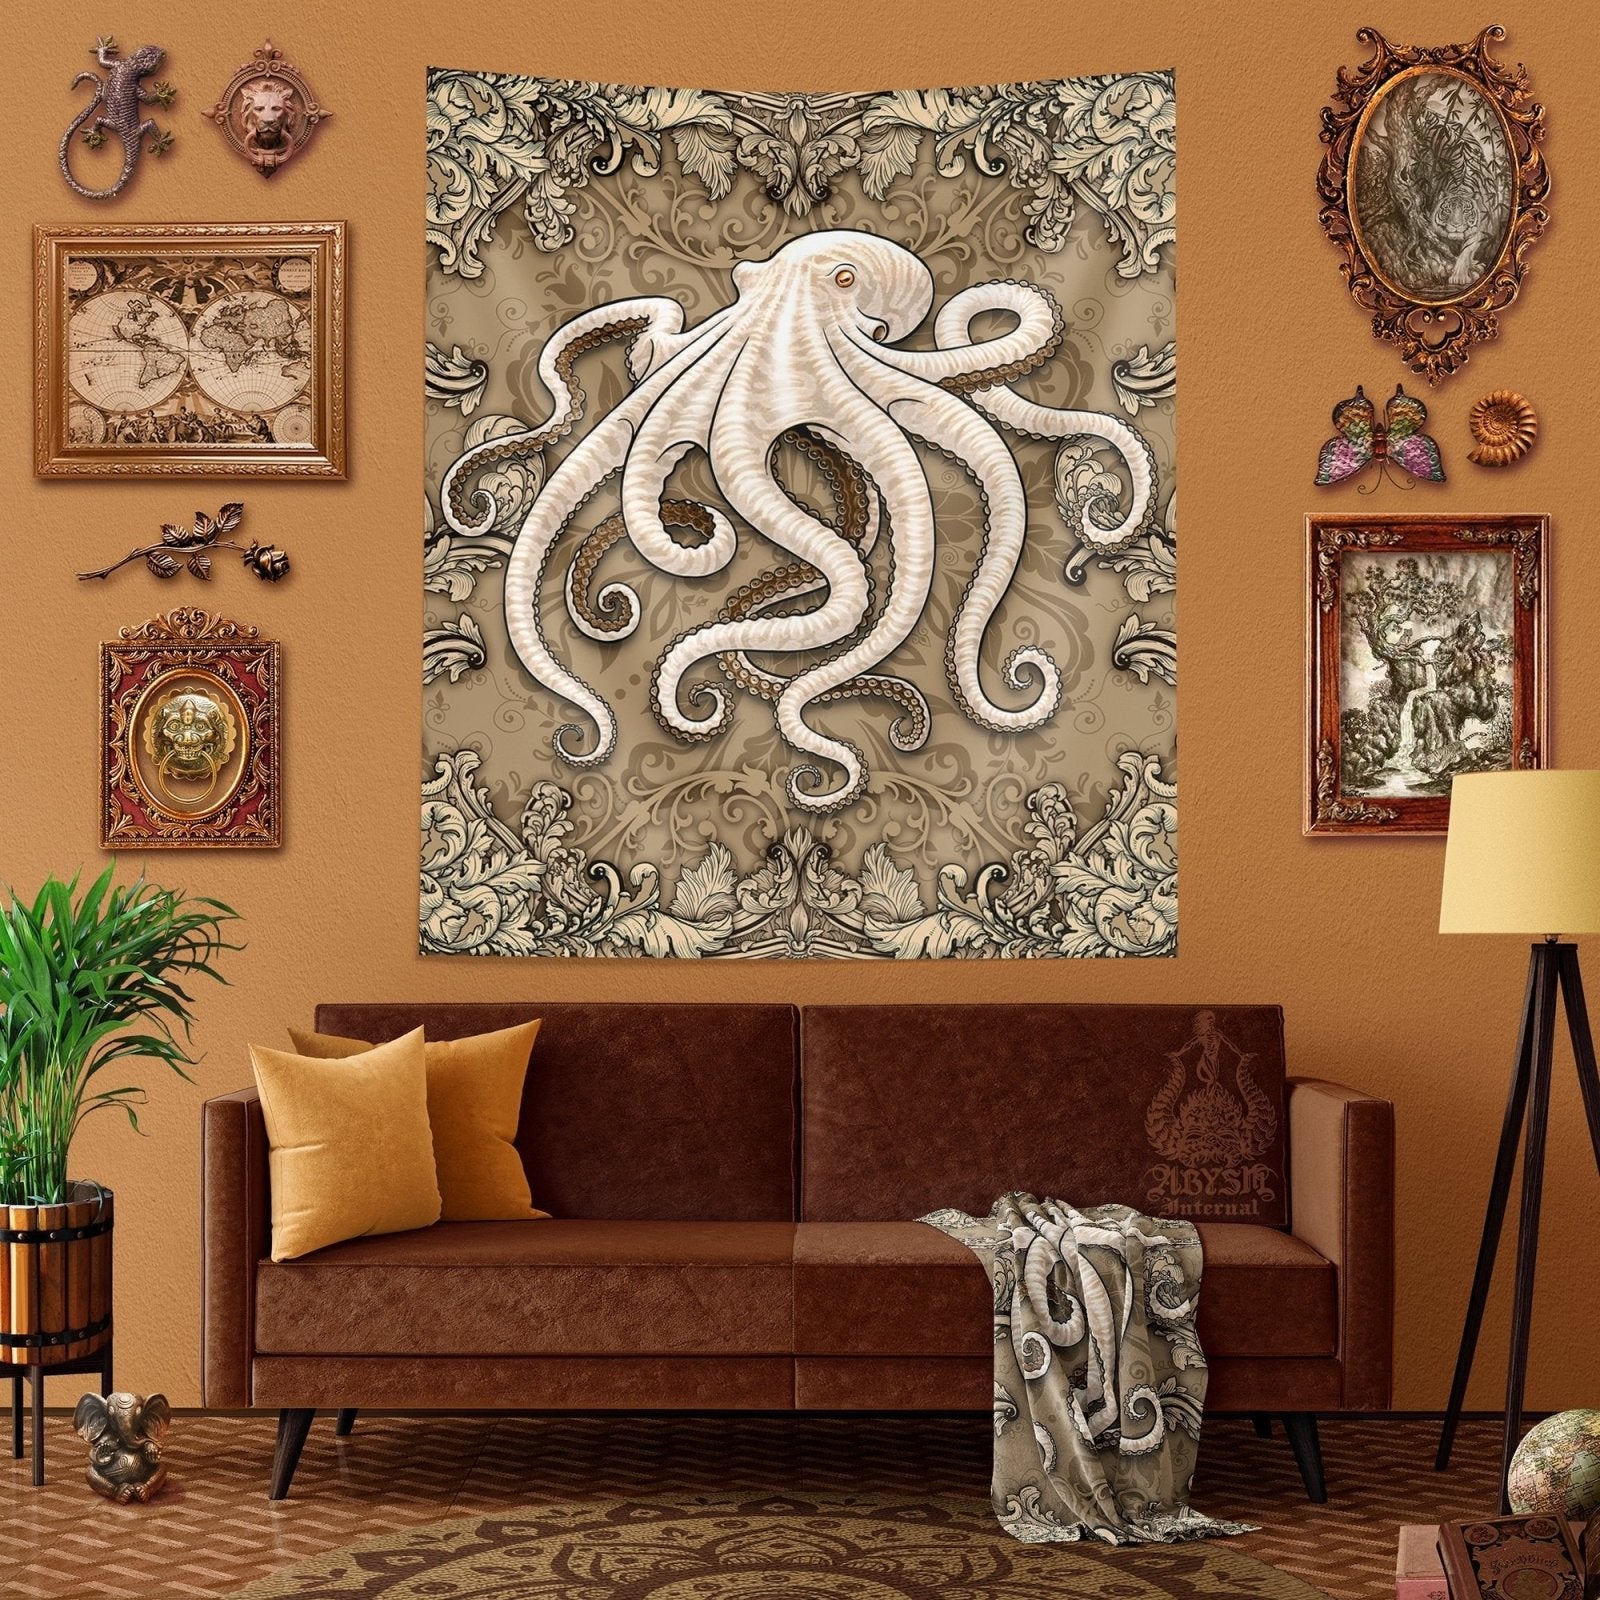 Coastal Tapestry, Octopus Wall Hanging, Beach Home Decor, Art Print, Eclectic and Funky - White & Cream - Abysm Internal